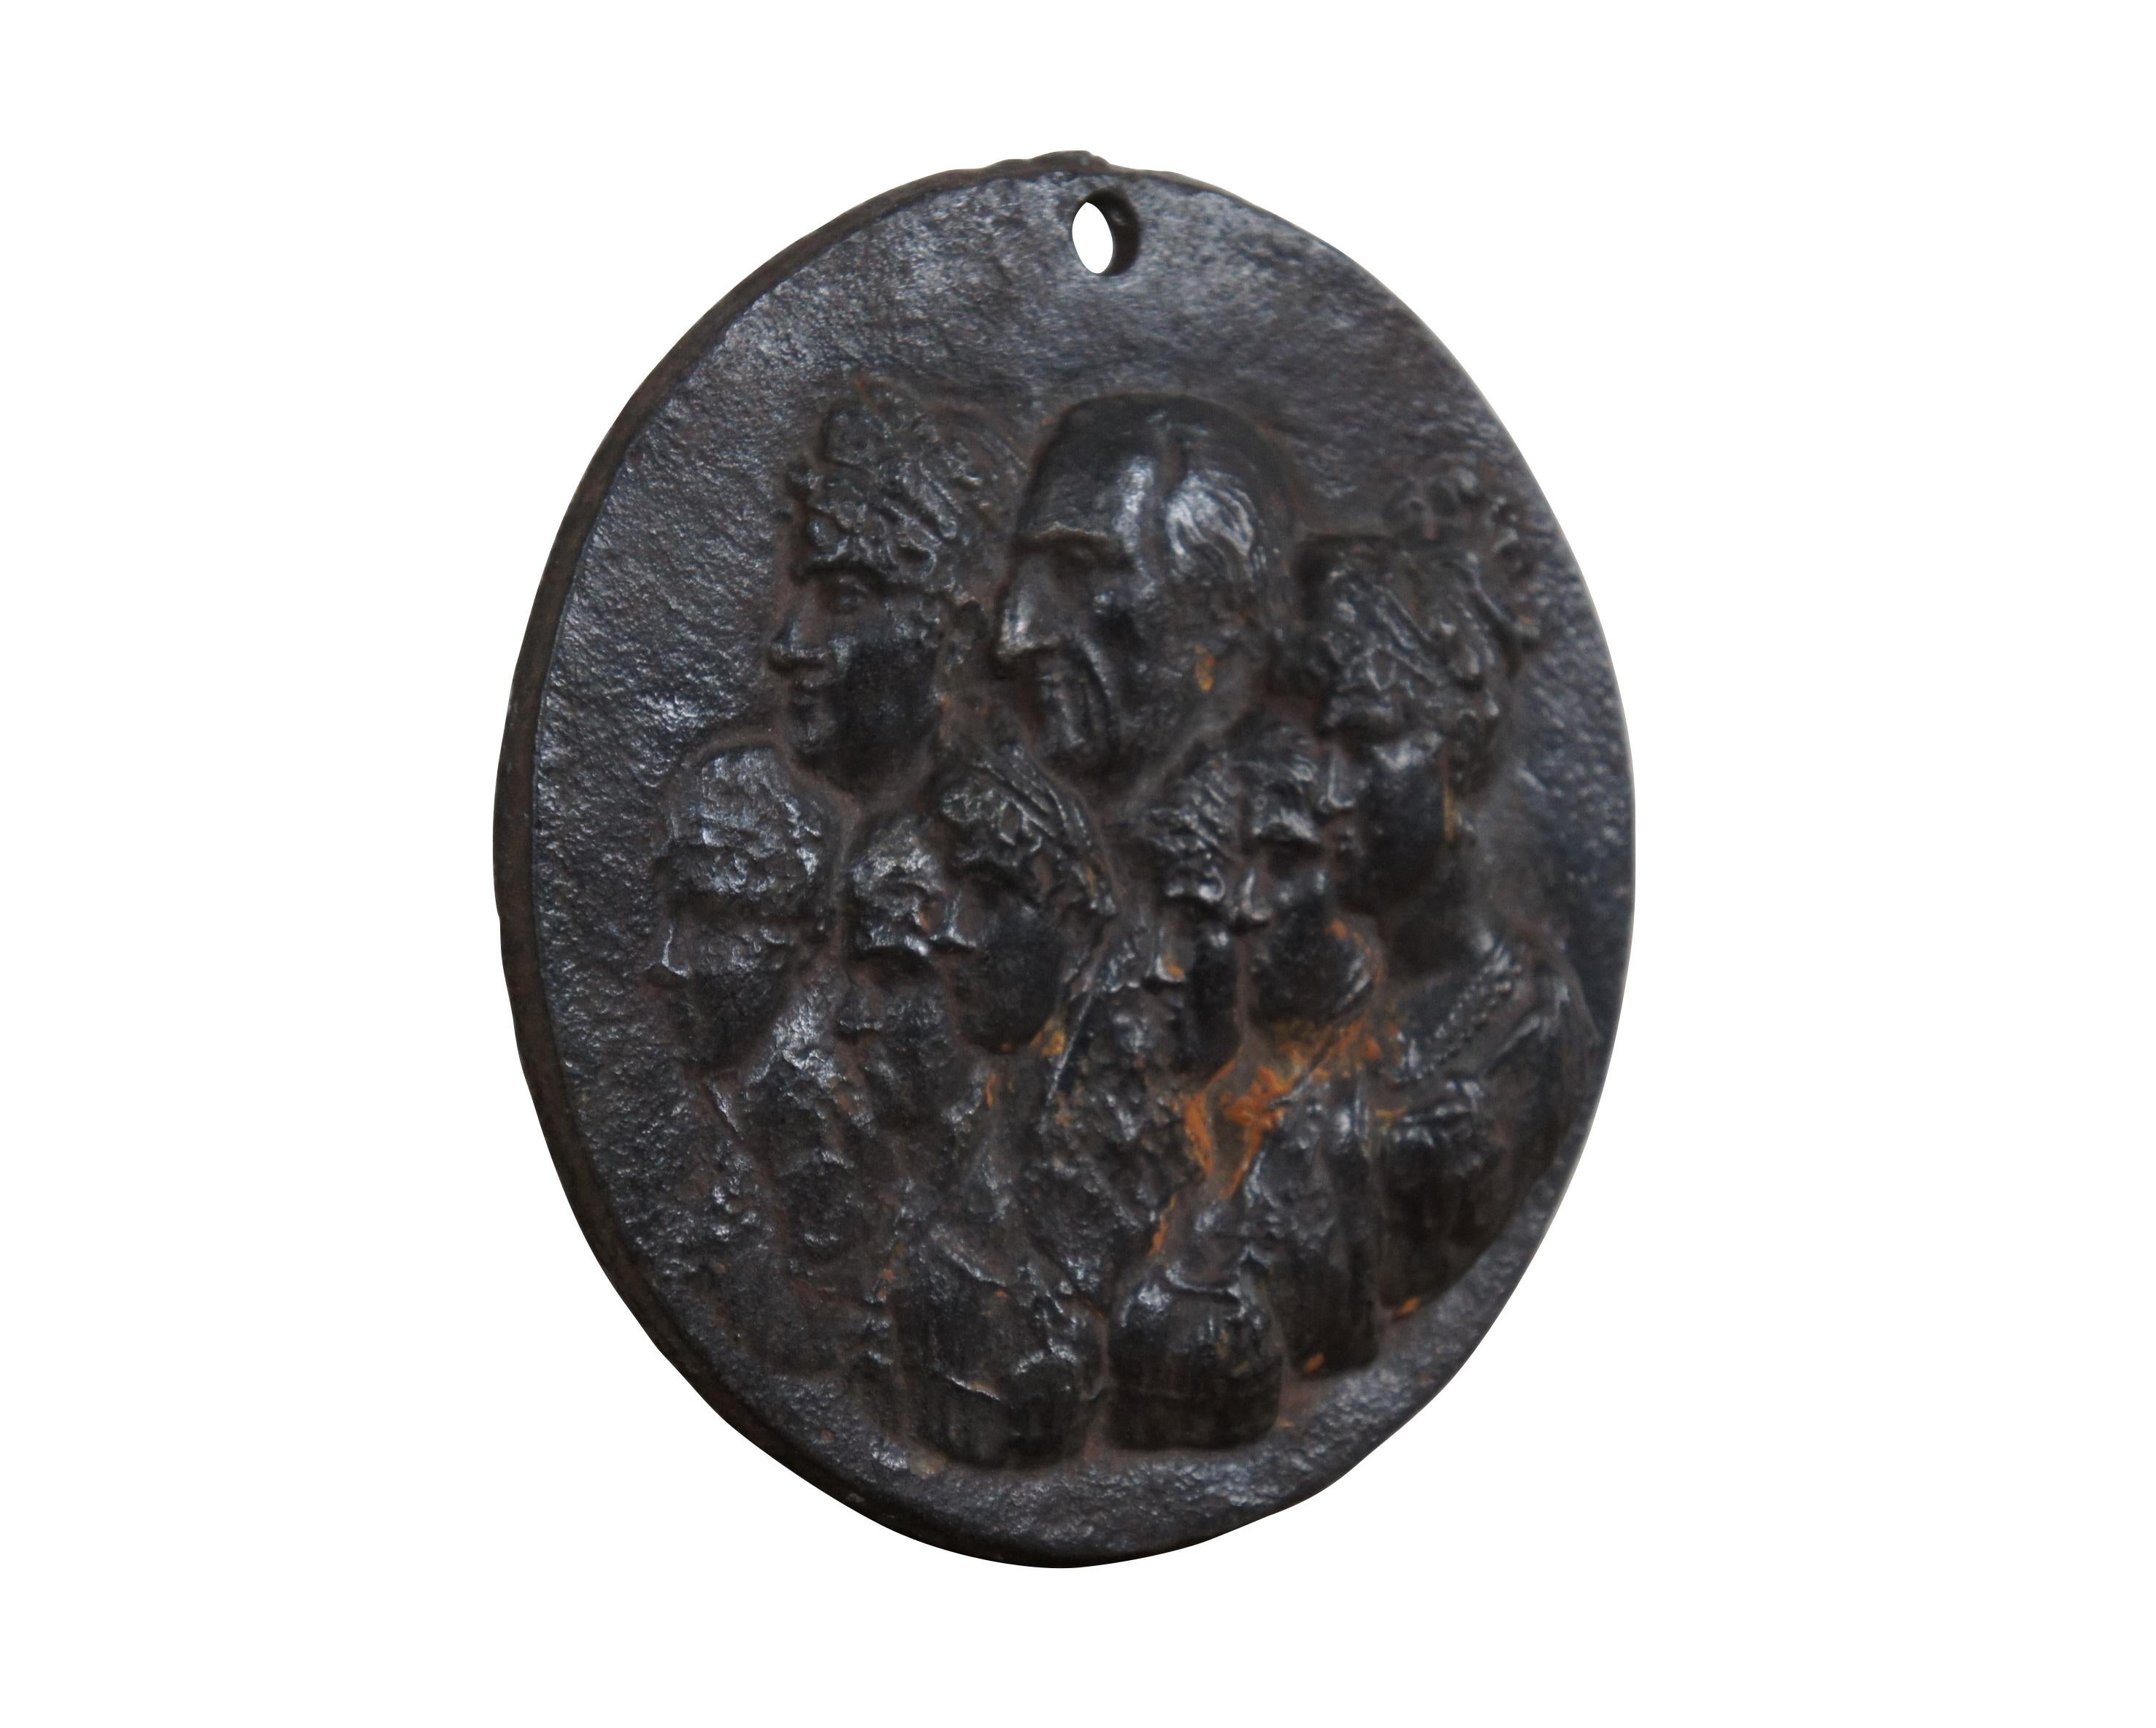 Circa 19th century cast iron medallion / wall plaque depicting a portrait of King Charles IV of Spain and his family. The group portrait shows King Charles IV, Queen Maria Luisa of Parma and five of their children - Carlota Joaquina, Maria Luisa,